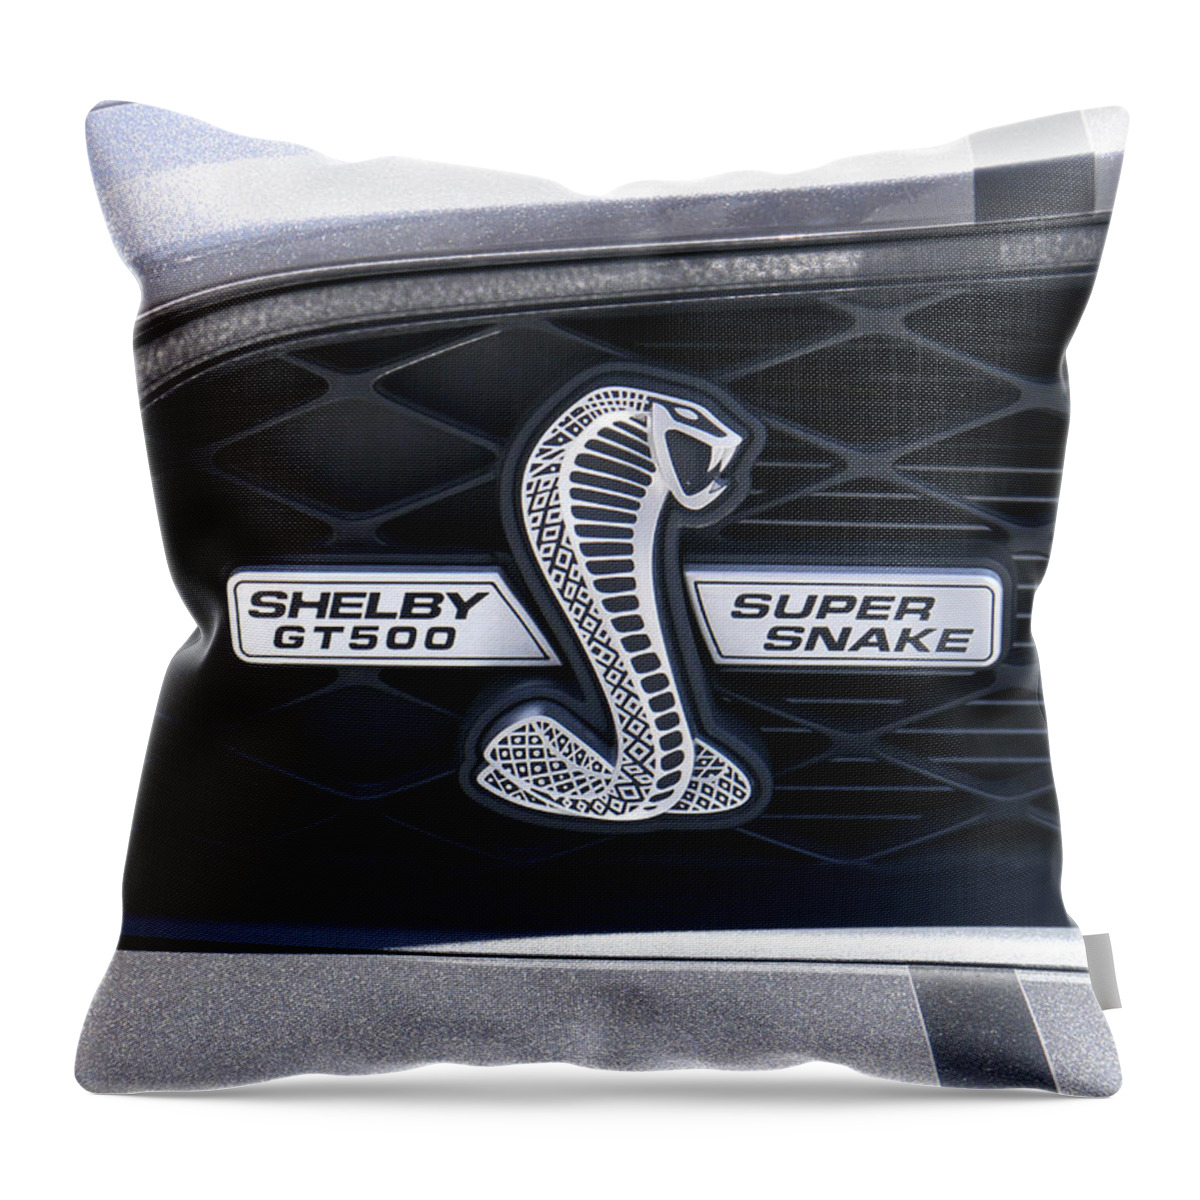 Transportation Throw Pillow featuring the photograph SHELBY GT 500 Super Snake by Mike McGlothlen